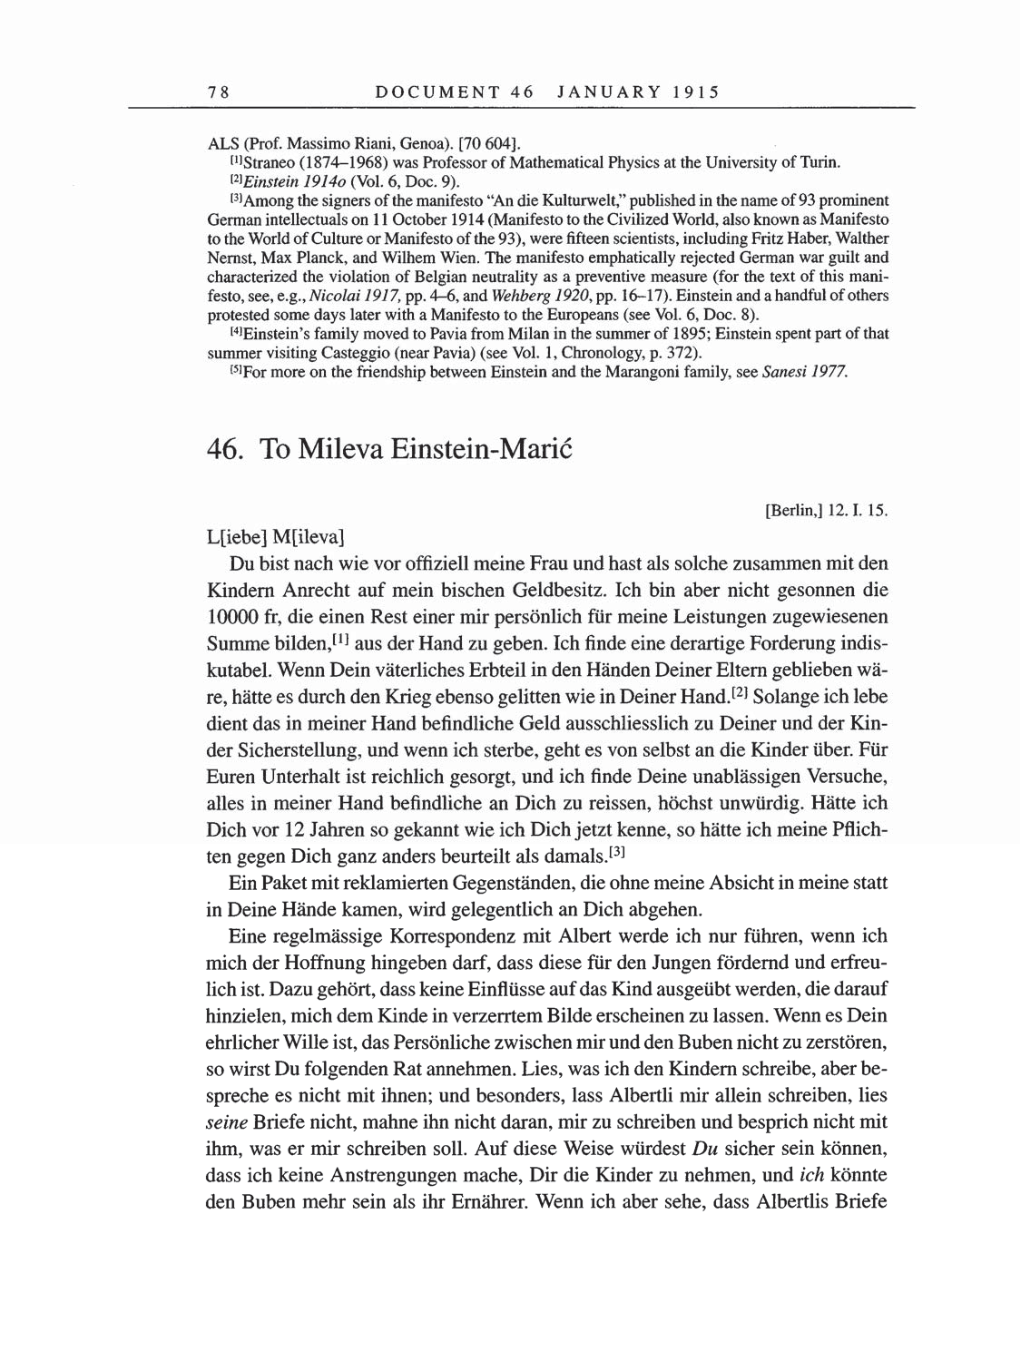 Volume 8, Part A: The Berlin Years: Correspondence 1914-1917 page 78